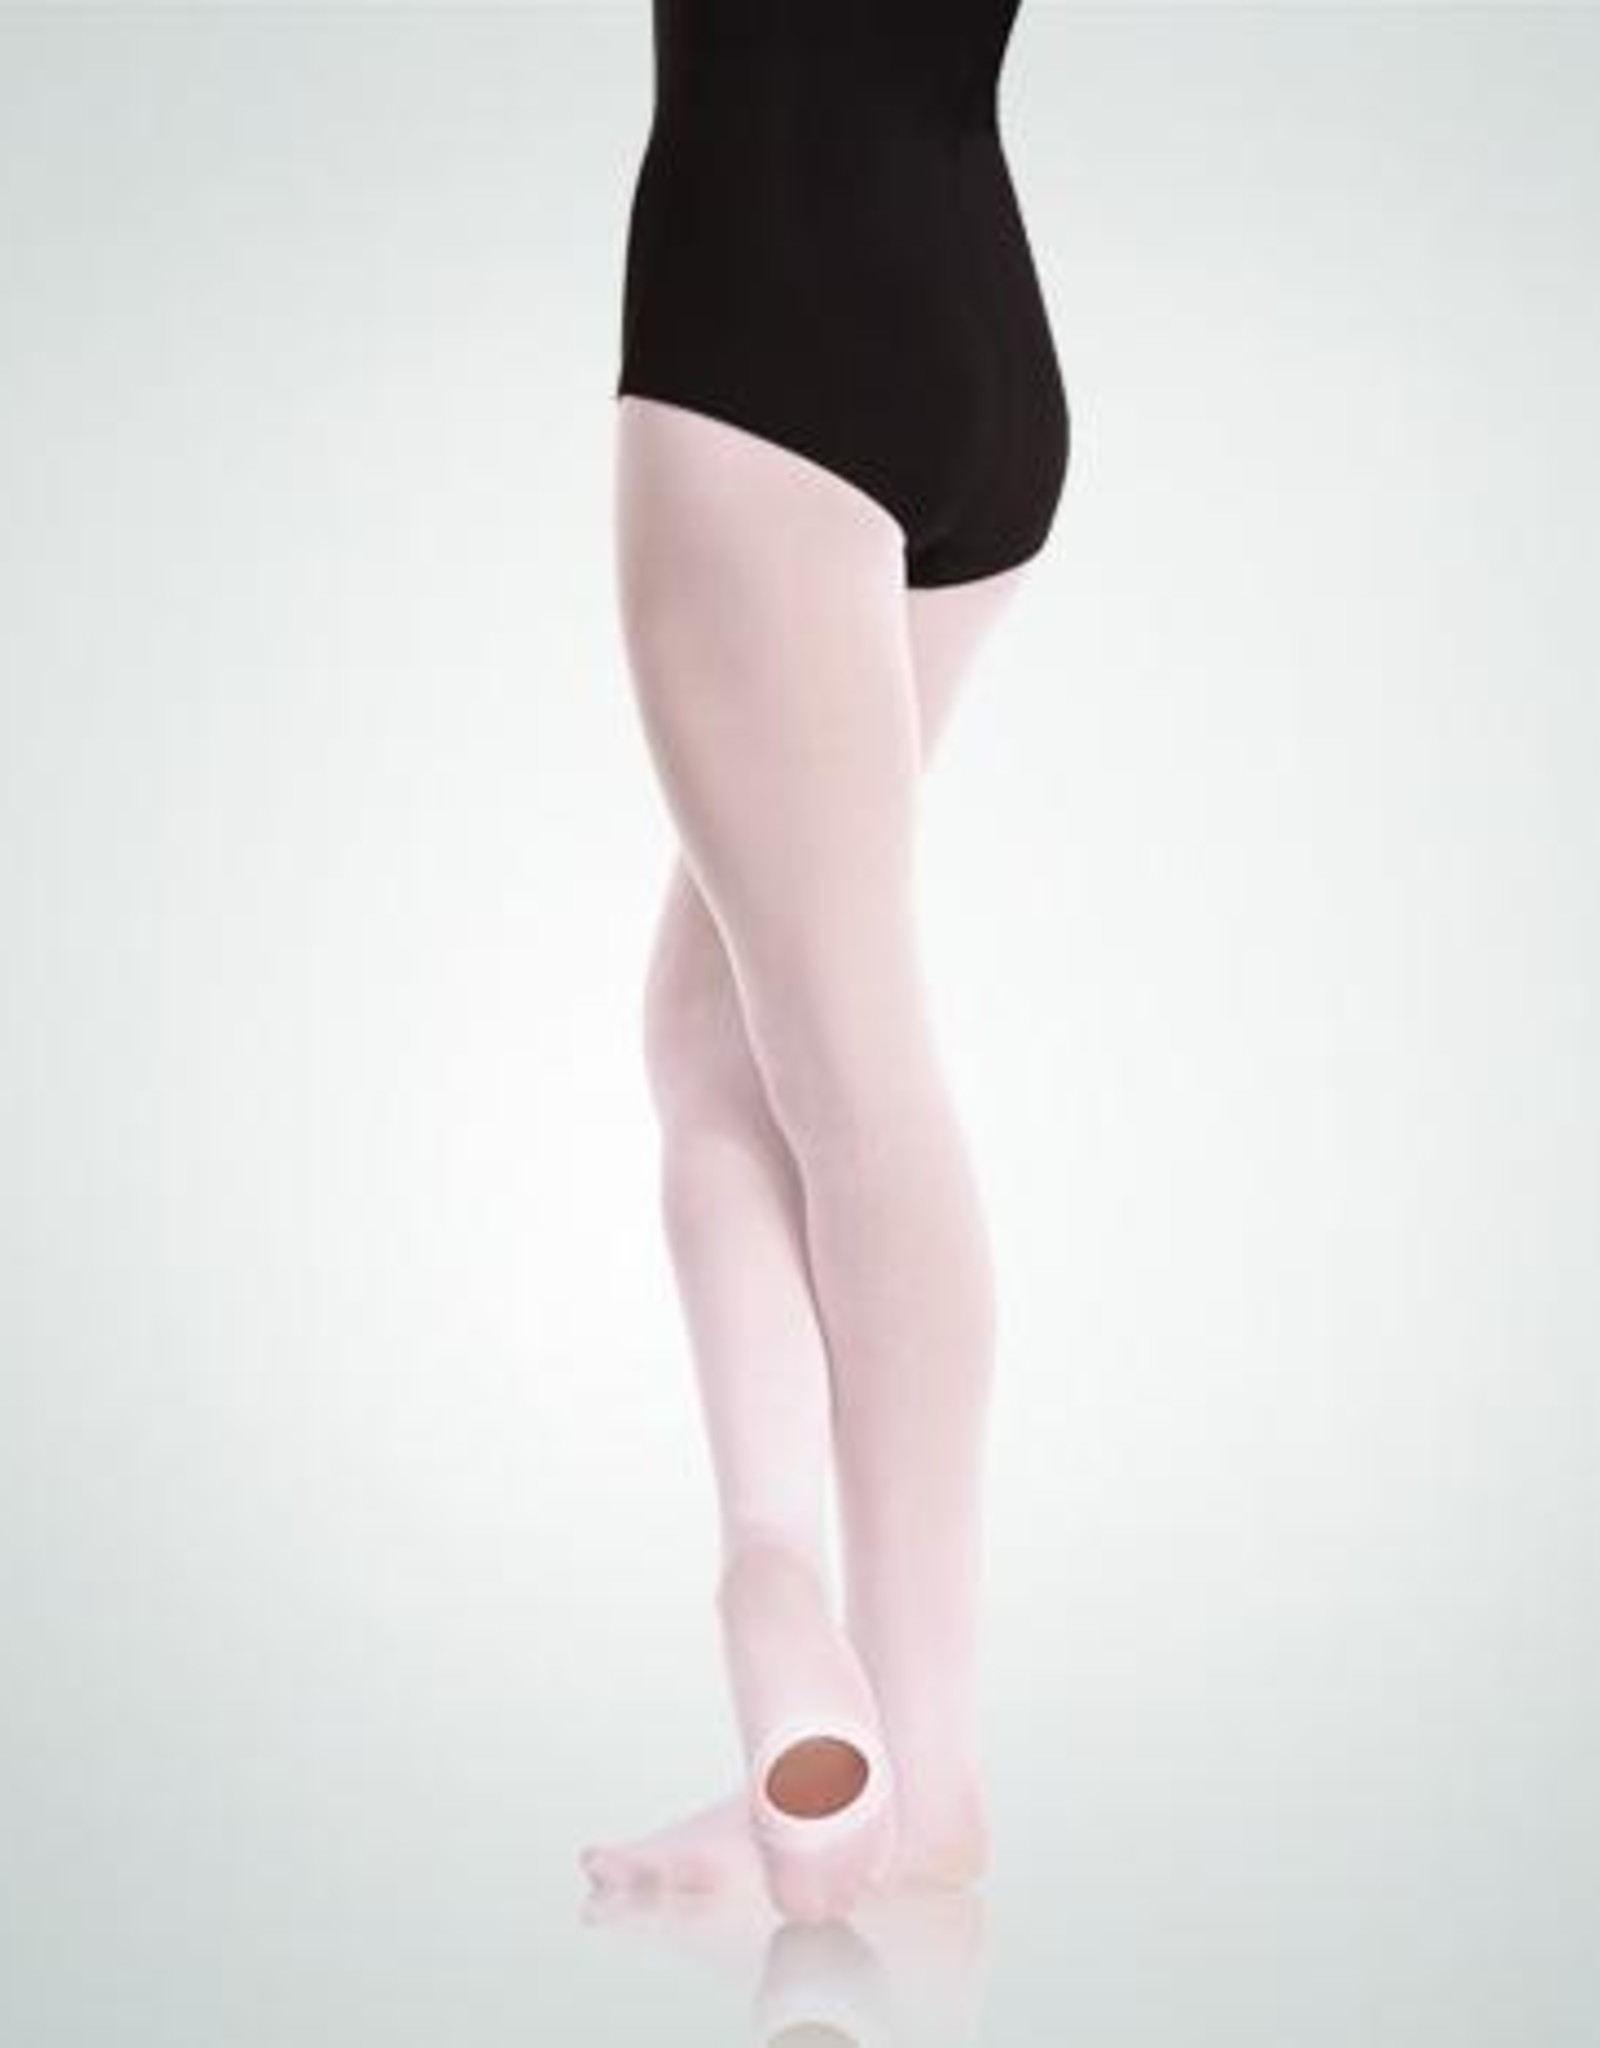 Body Wrappers Ladies' A81 Convertible Tights